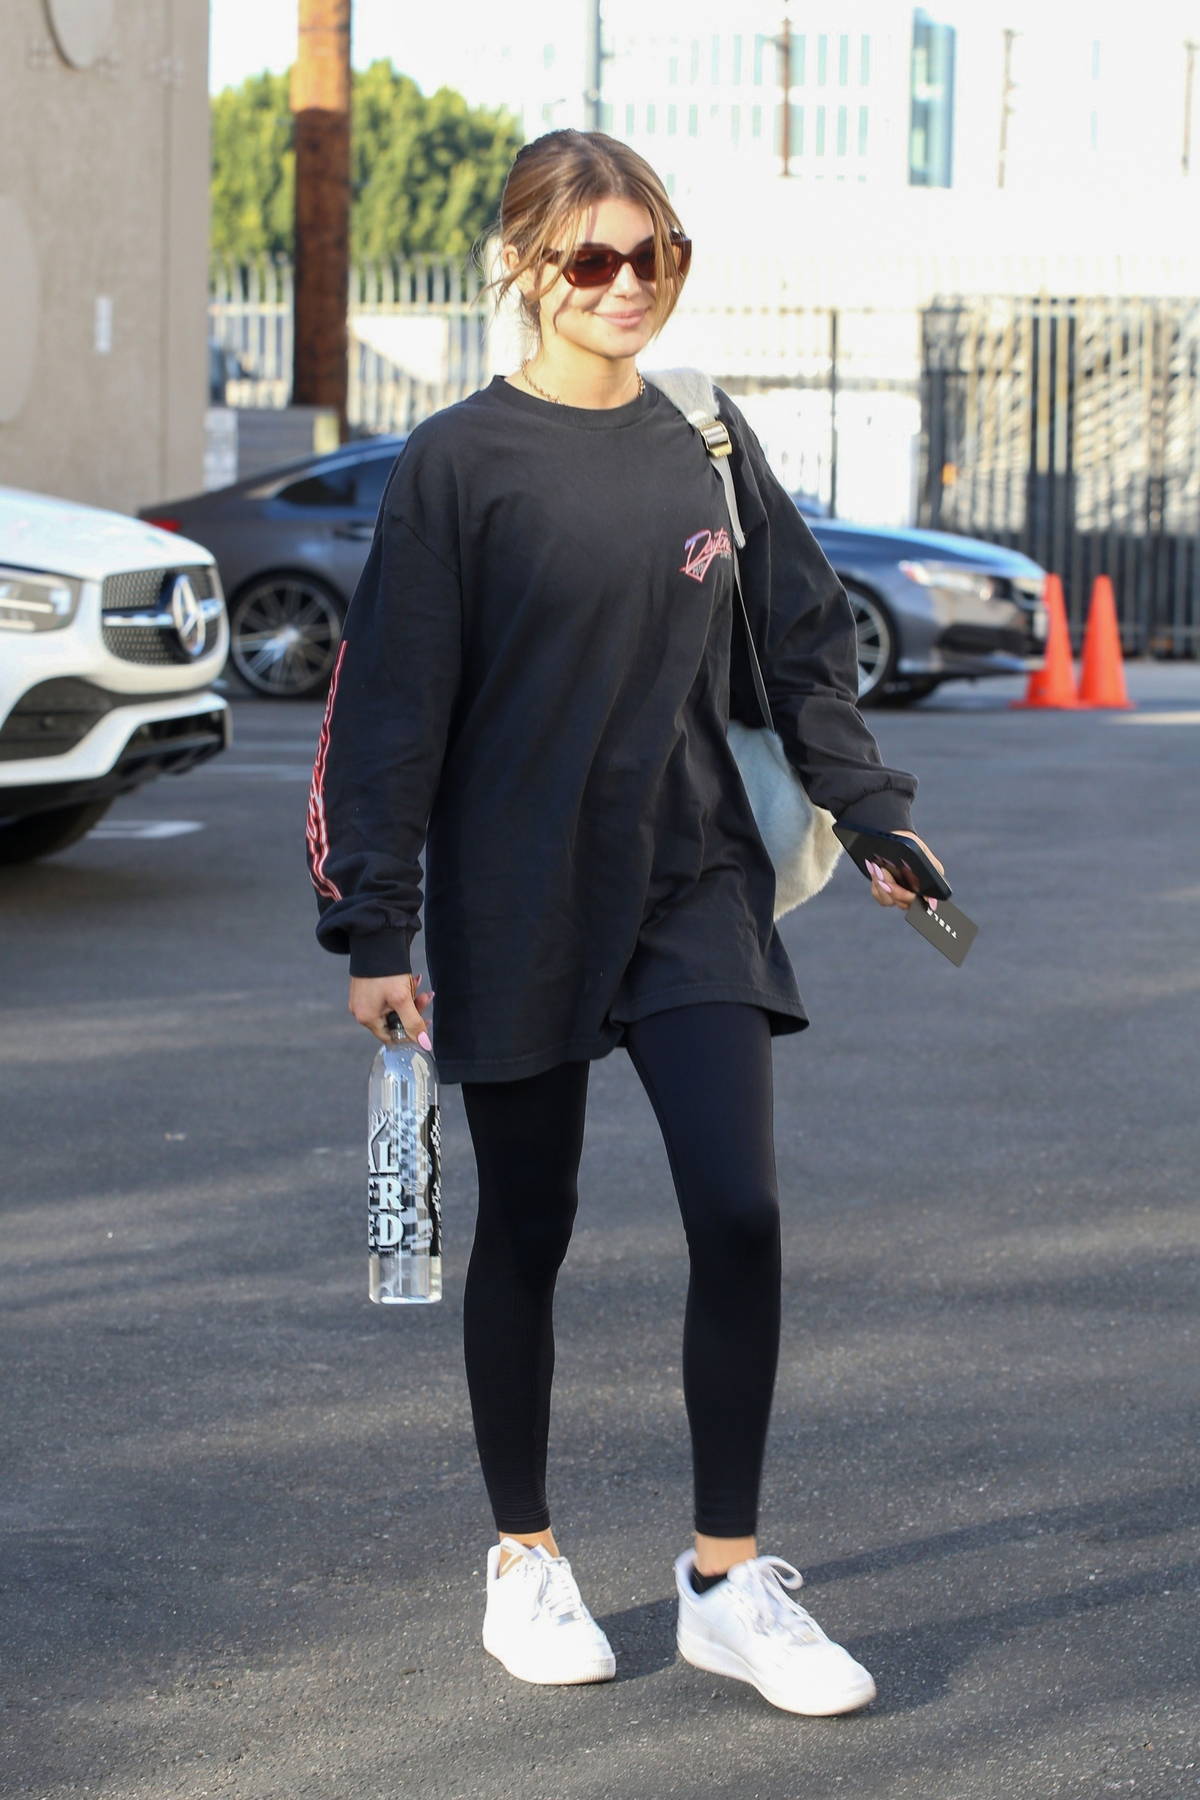 Olivia Jade Giannulli seen carrying a prop sledgehammer while leaving ...